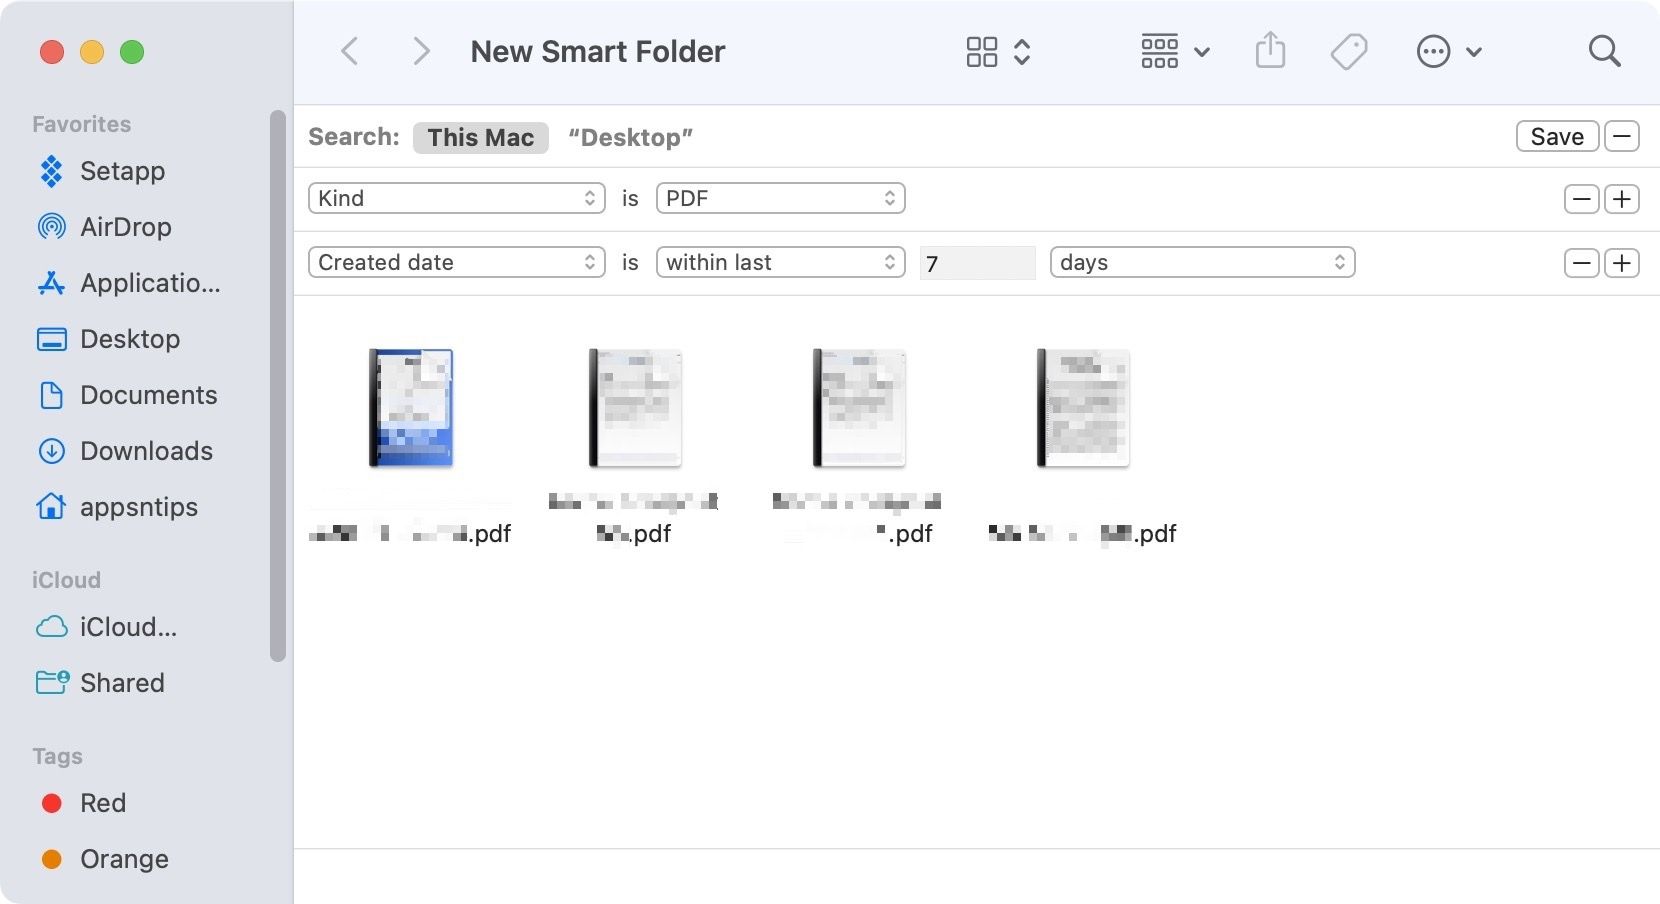 Find all PDF documents